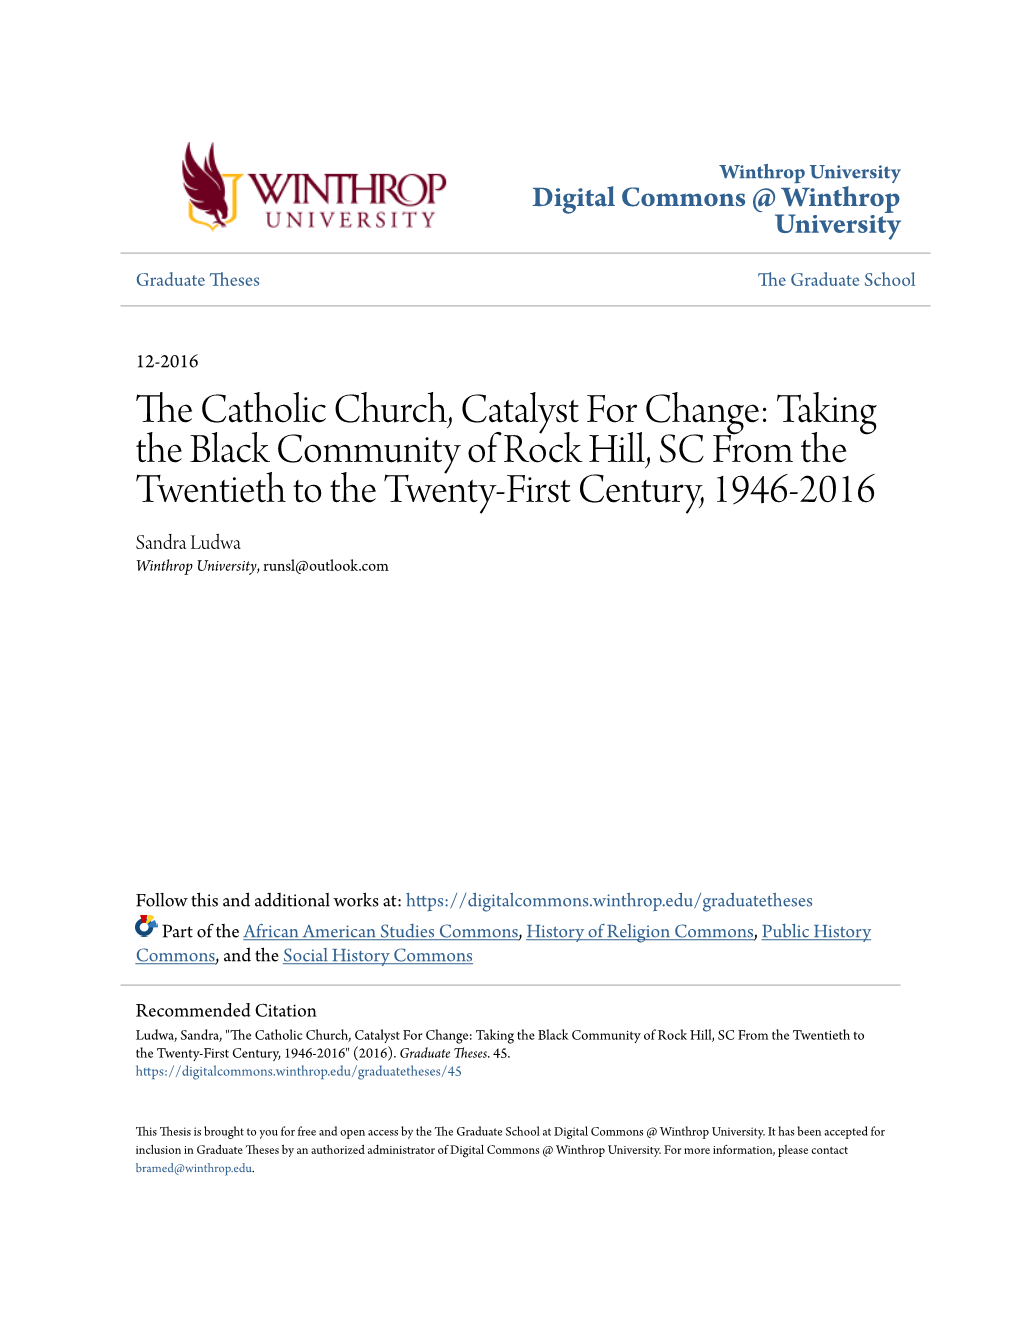 The Catholic Church, Catalyst for Change: Taking the Black Community of Rock Hill, South Carolina from the Twentieth to the Twenty-First Century: 1946-2016